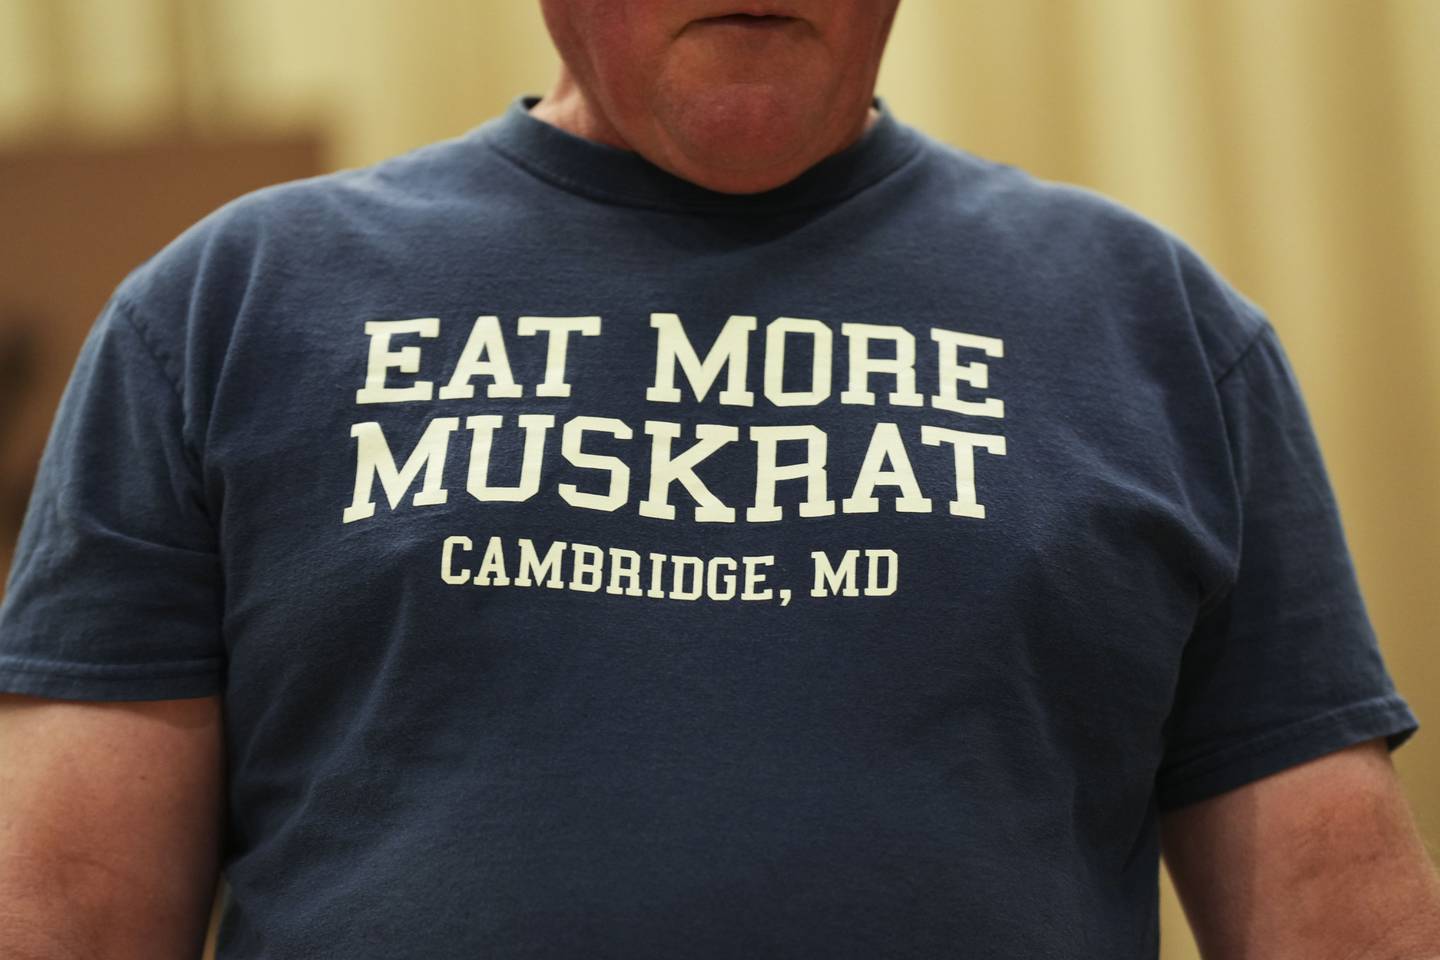 'Eat More Muskrat' shirts were a common sight.